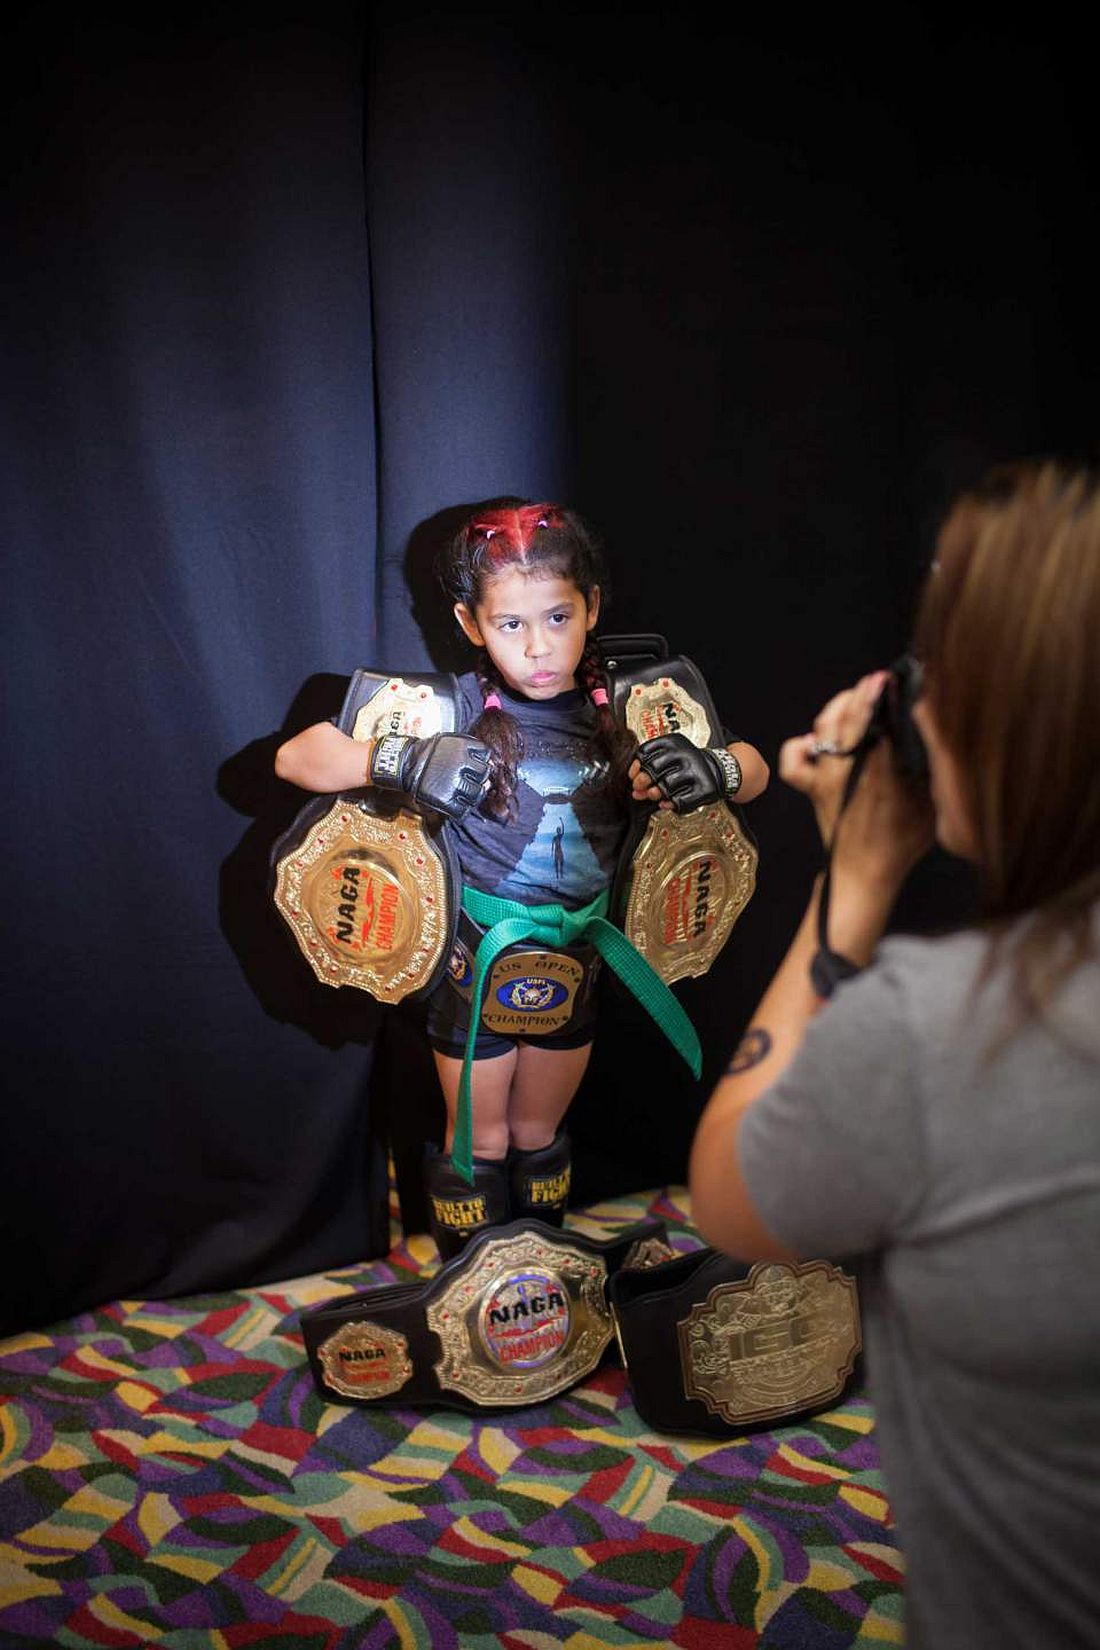 Regina "Black Widow" Awana, 7, with her Championship belts, posing for her sponsor at United States Fight League(USFL) All-star Pankration show at Blue Water Casino in Parker, Arizona on 25th of October 2013. Photo: Miikka Pirinen